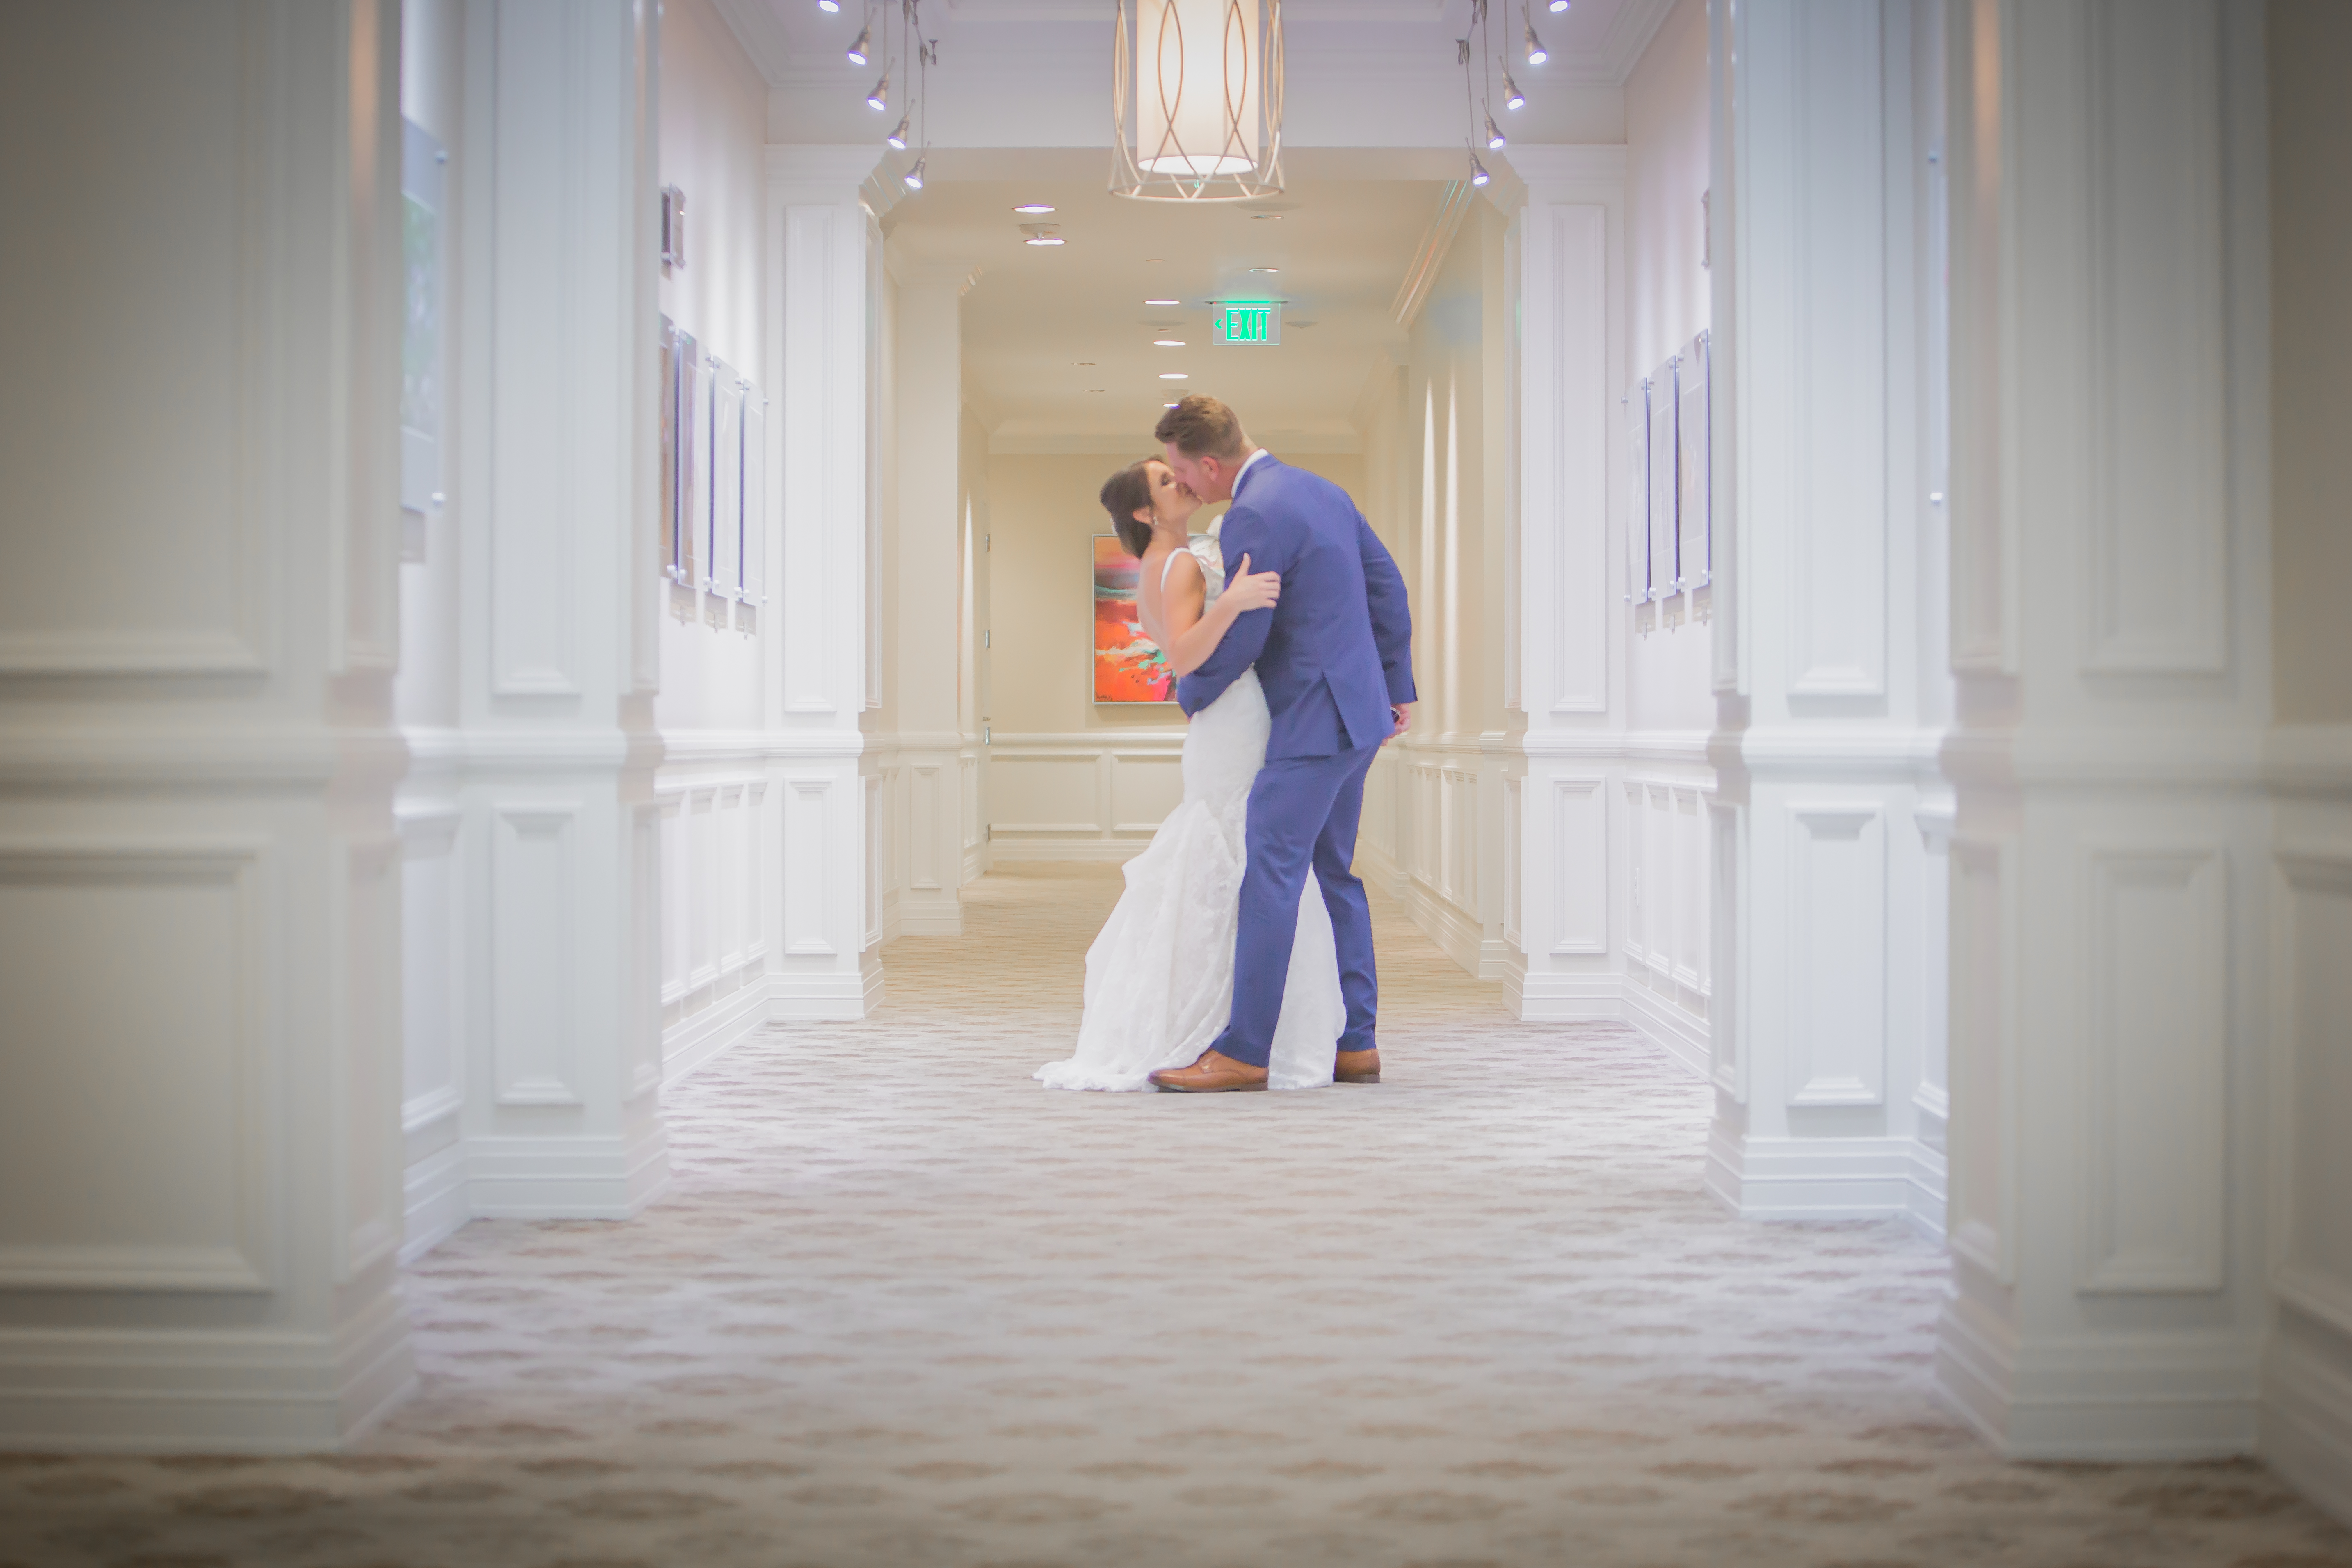 Wedding photography of the bride and groom at the Ibis Golf and Country club by Couture Bridal Photography. Couture Bridal Photography is the best wedding photographer serving Palm Beach Gardens, Florida.